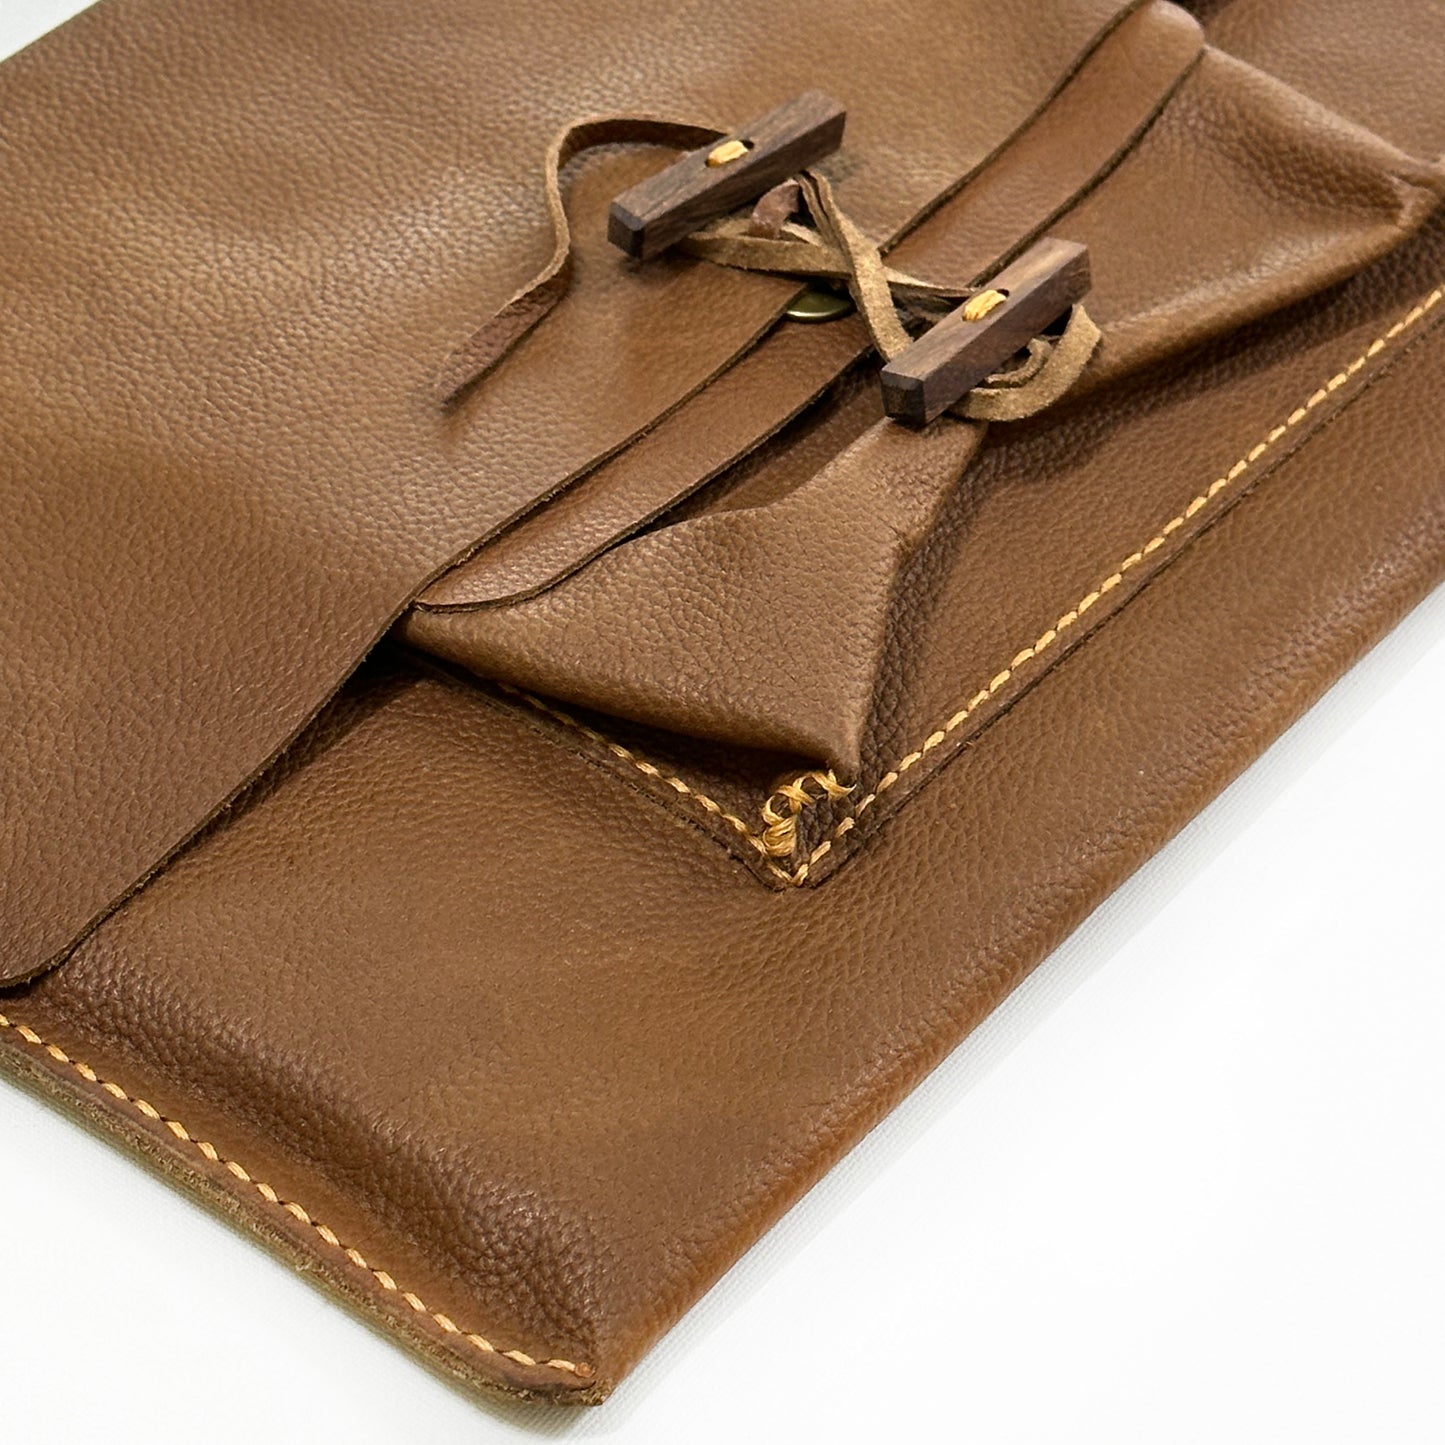 Laptop Sleeve 13 inches - Camel Brown